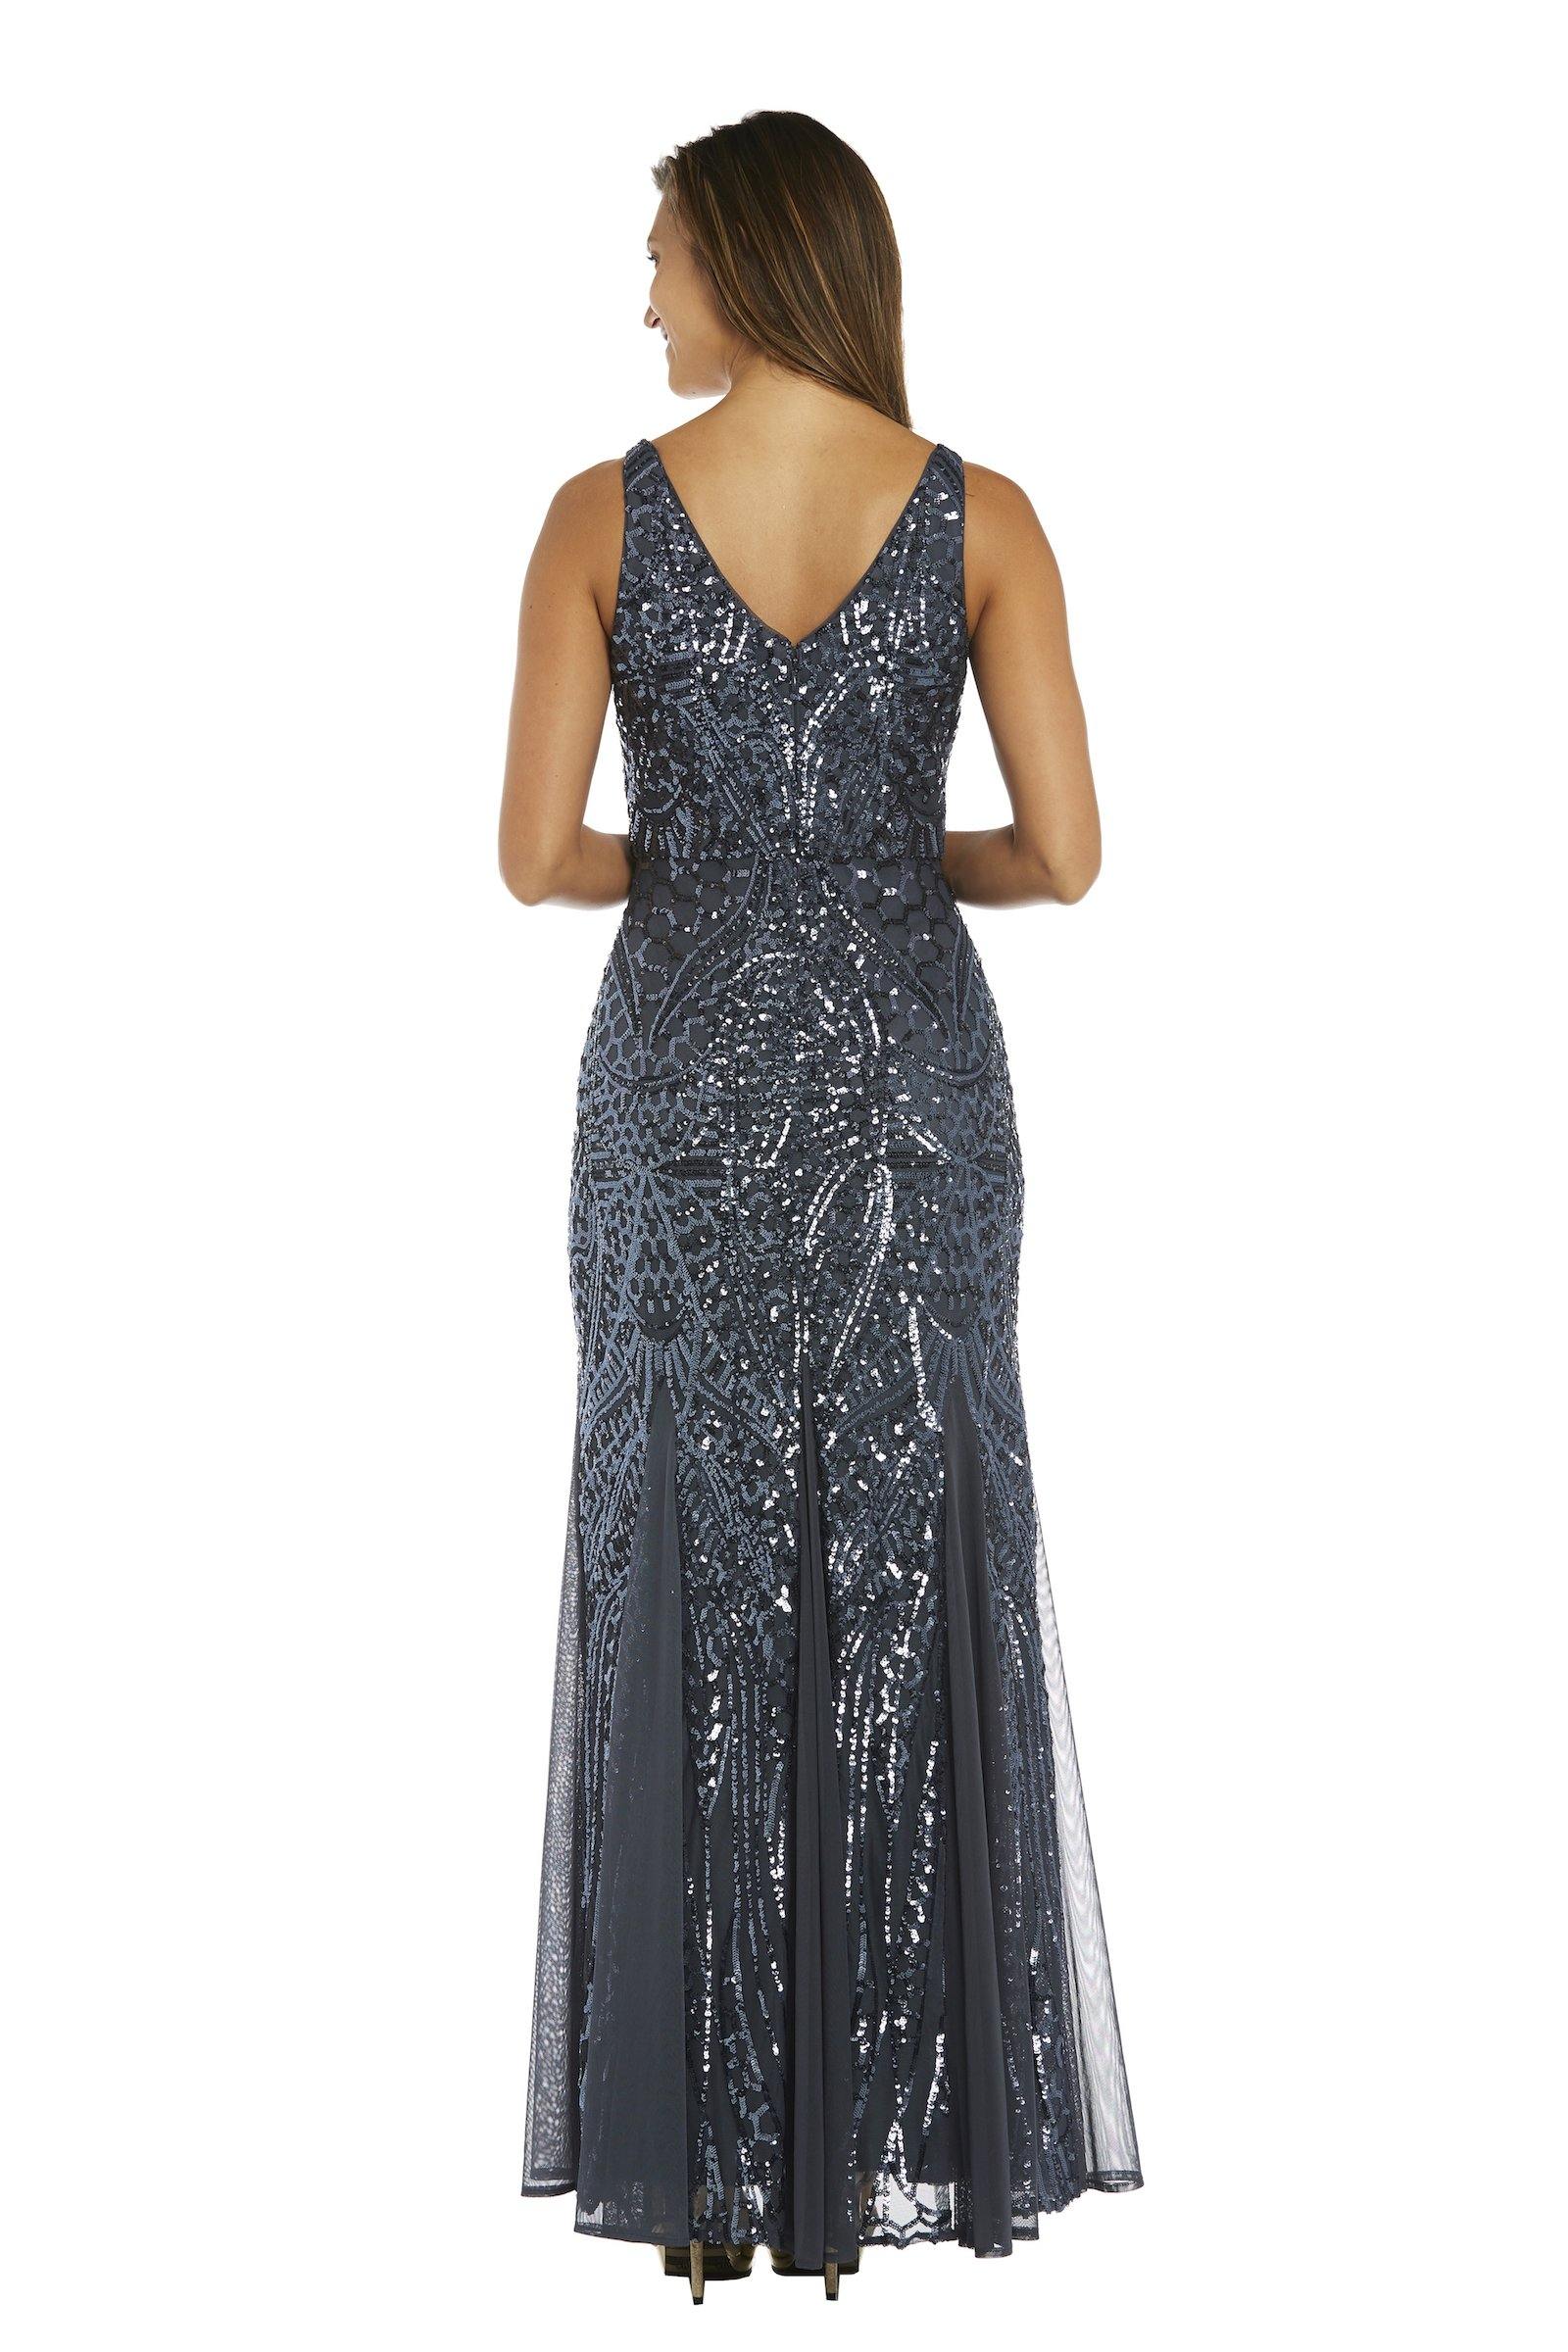 Nightway Long Formal Sequins Dress 21685 - The Dress Outlet